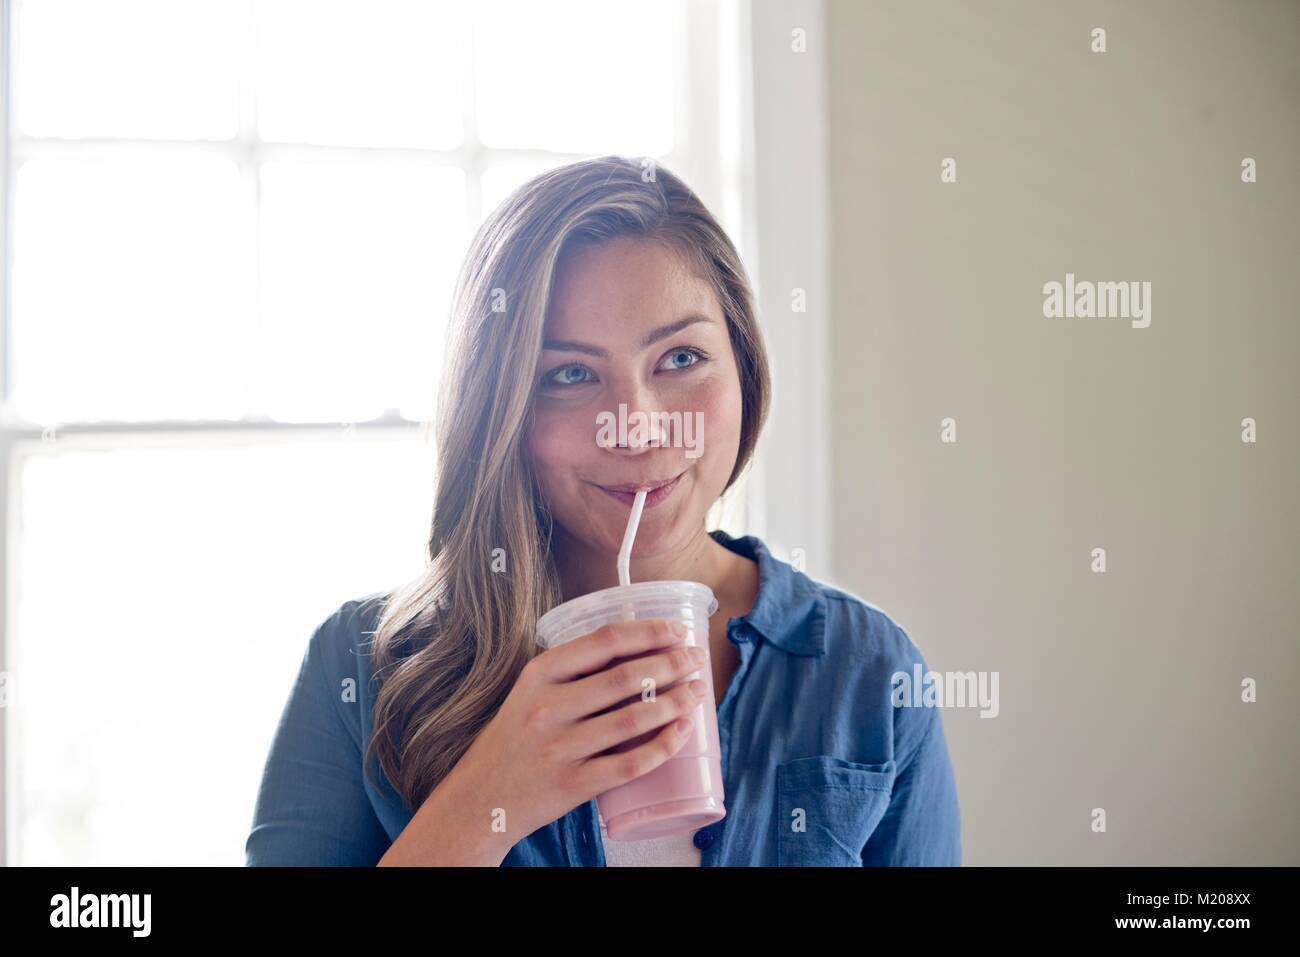 Portrait of young woman drinking through straw. Stock Photo